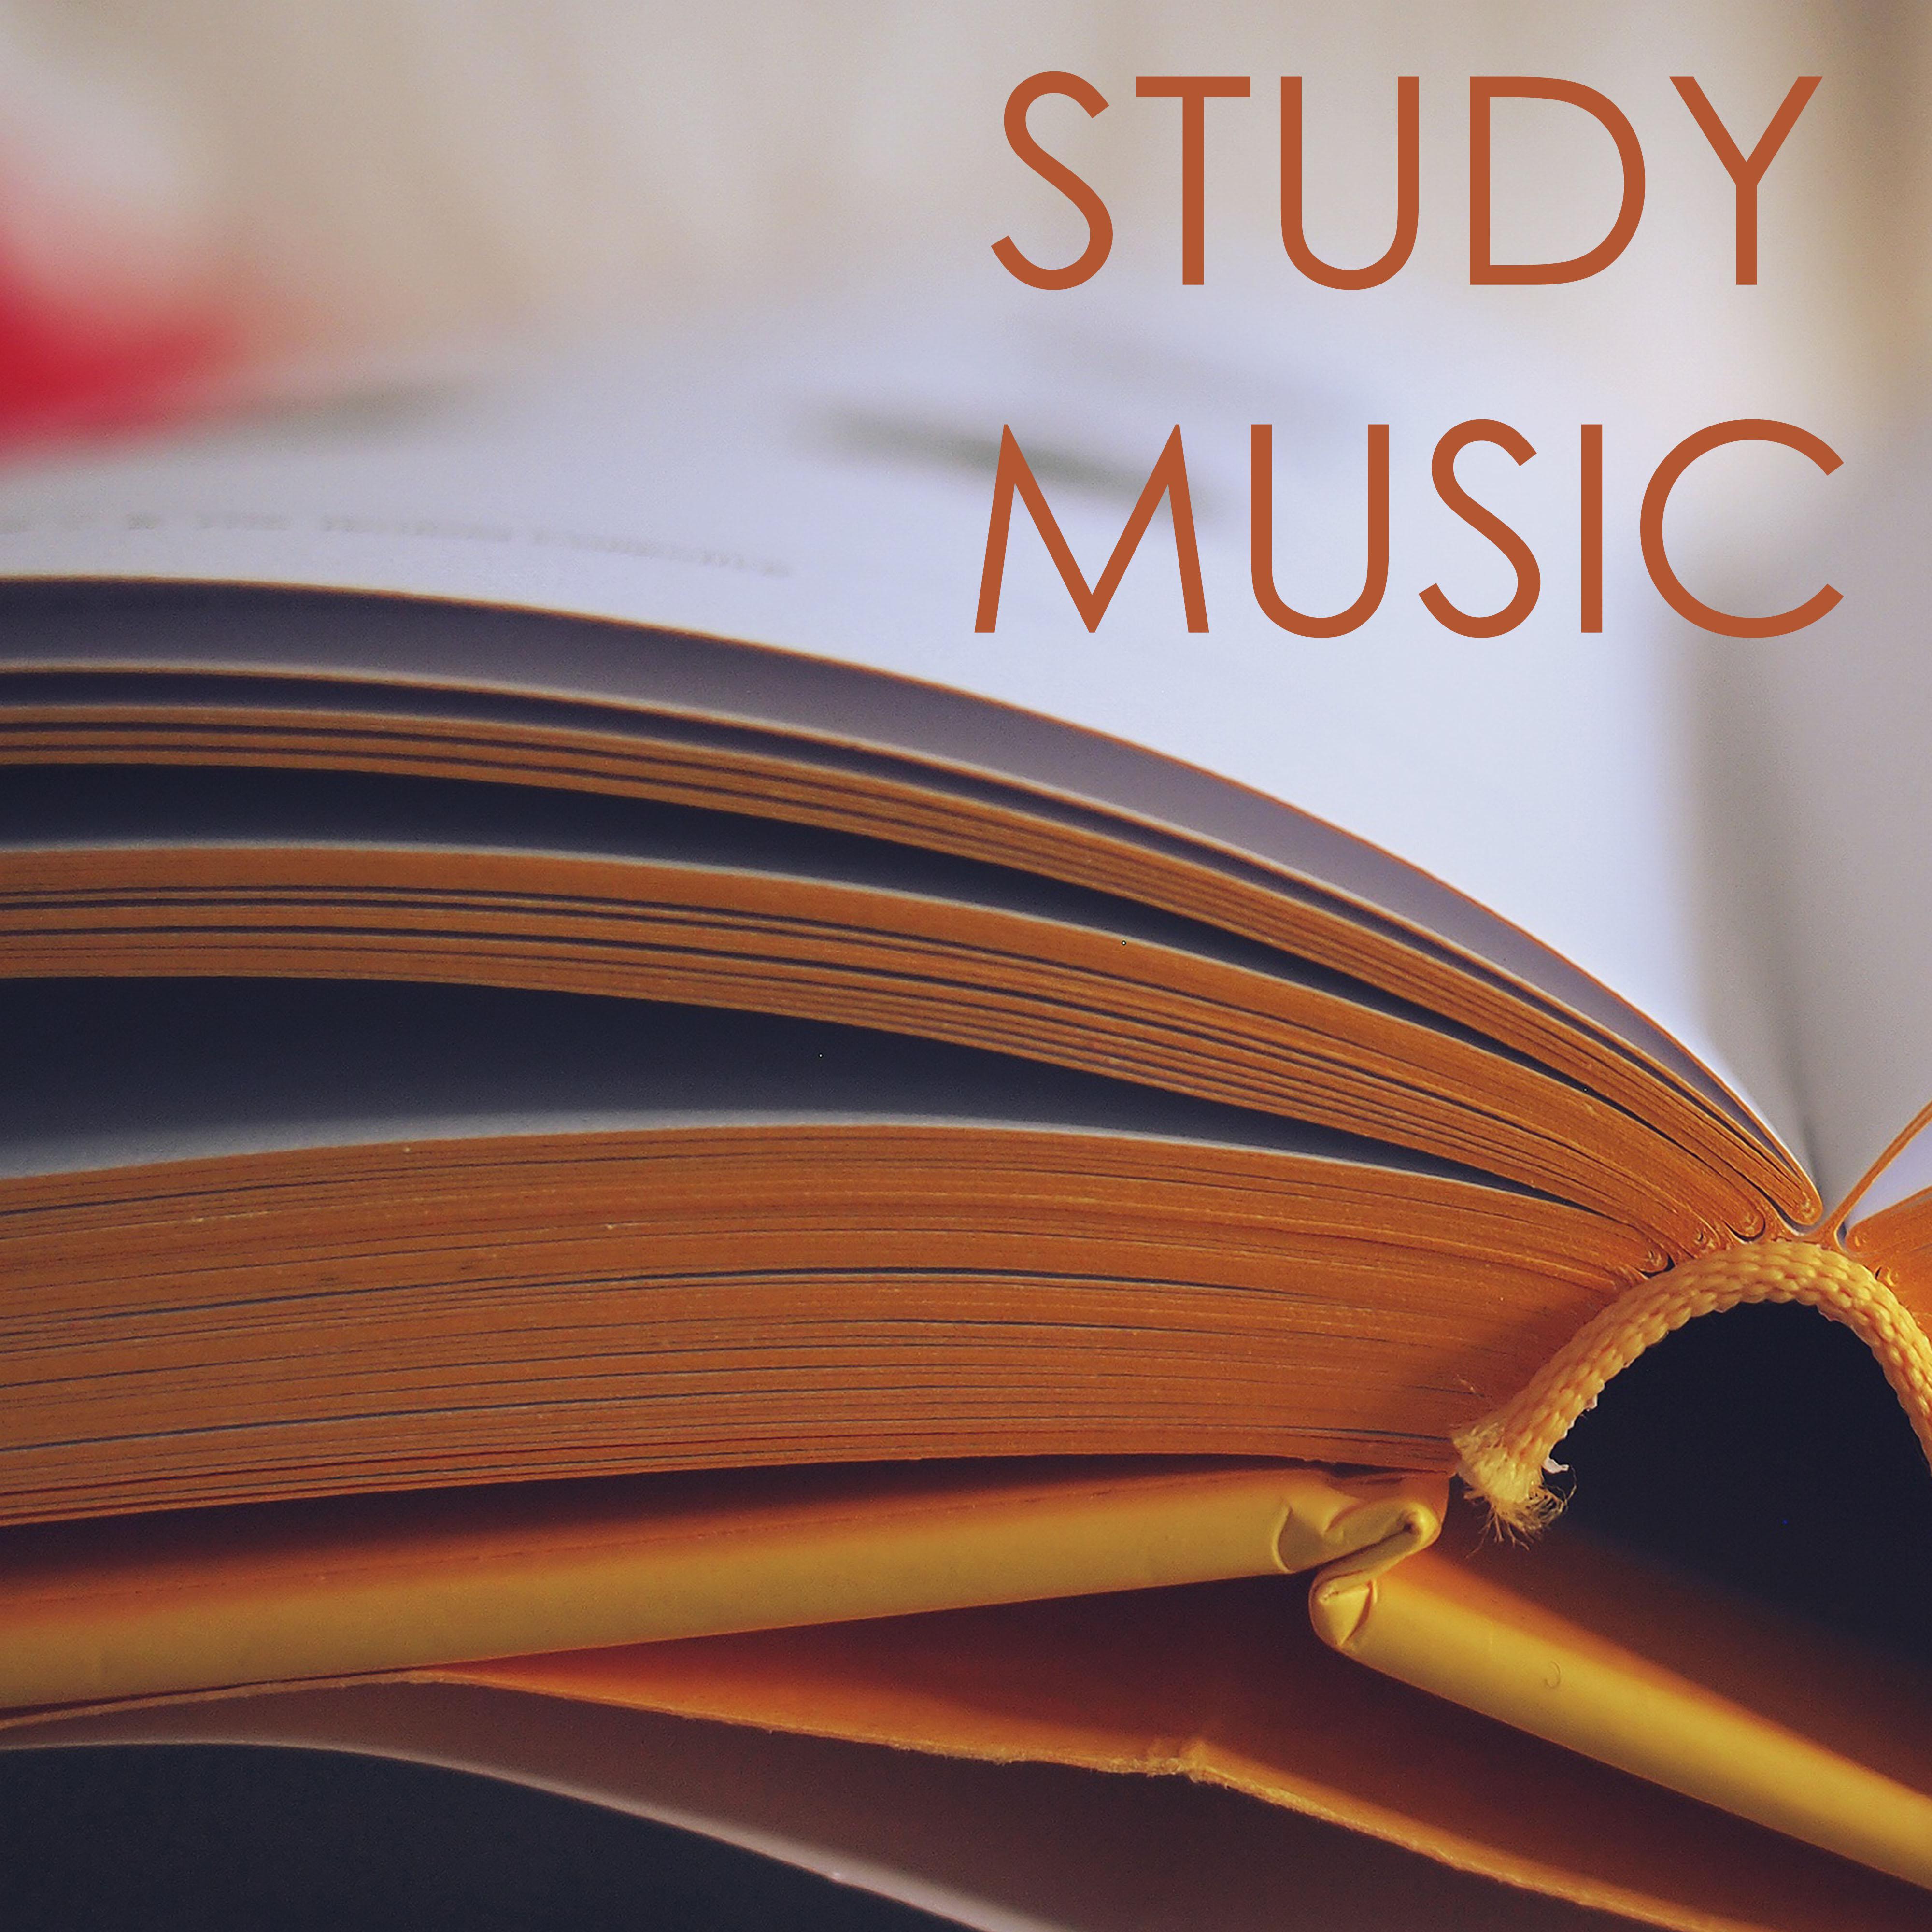 Music for Deep Study in the Library